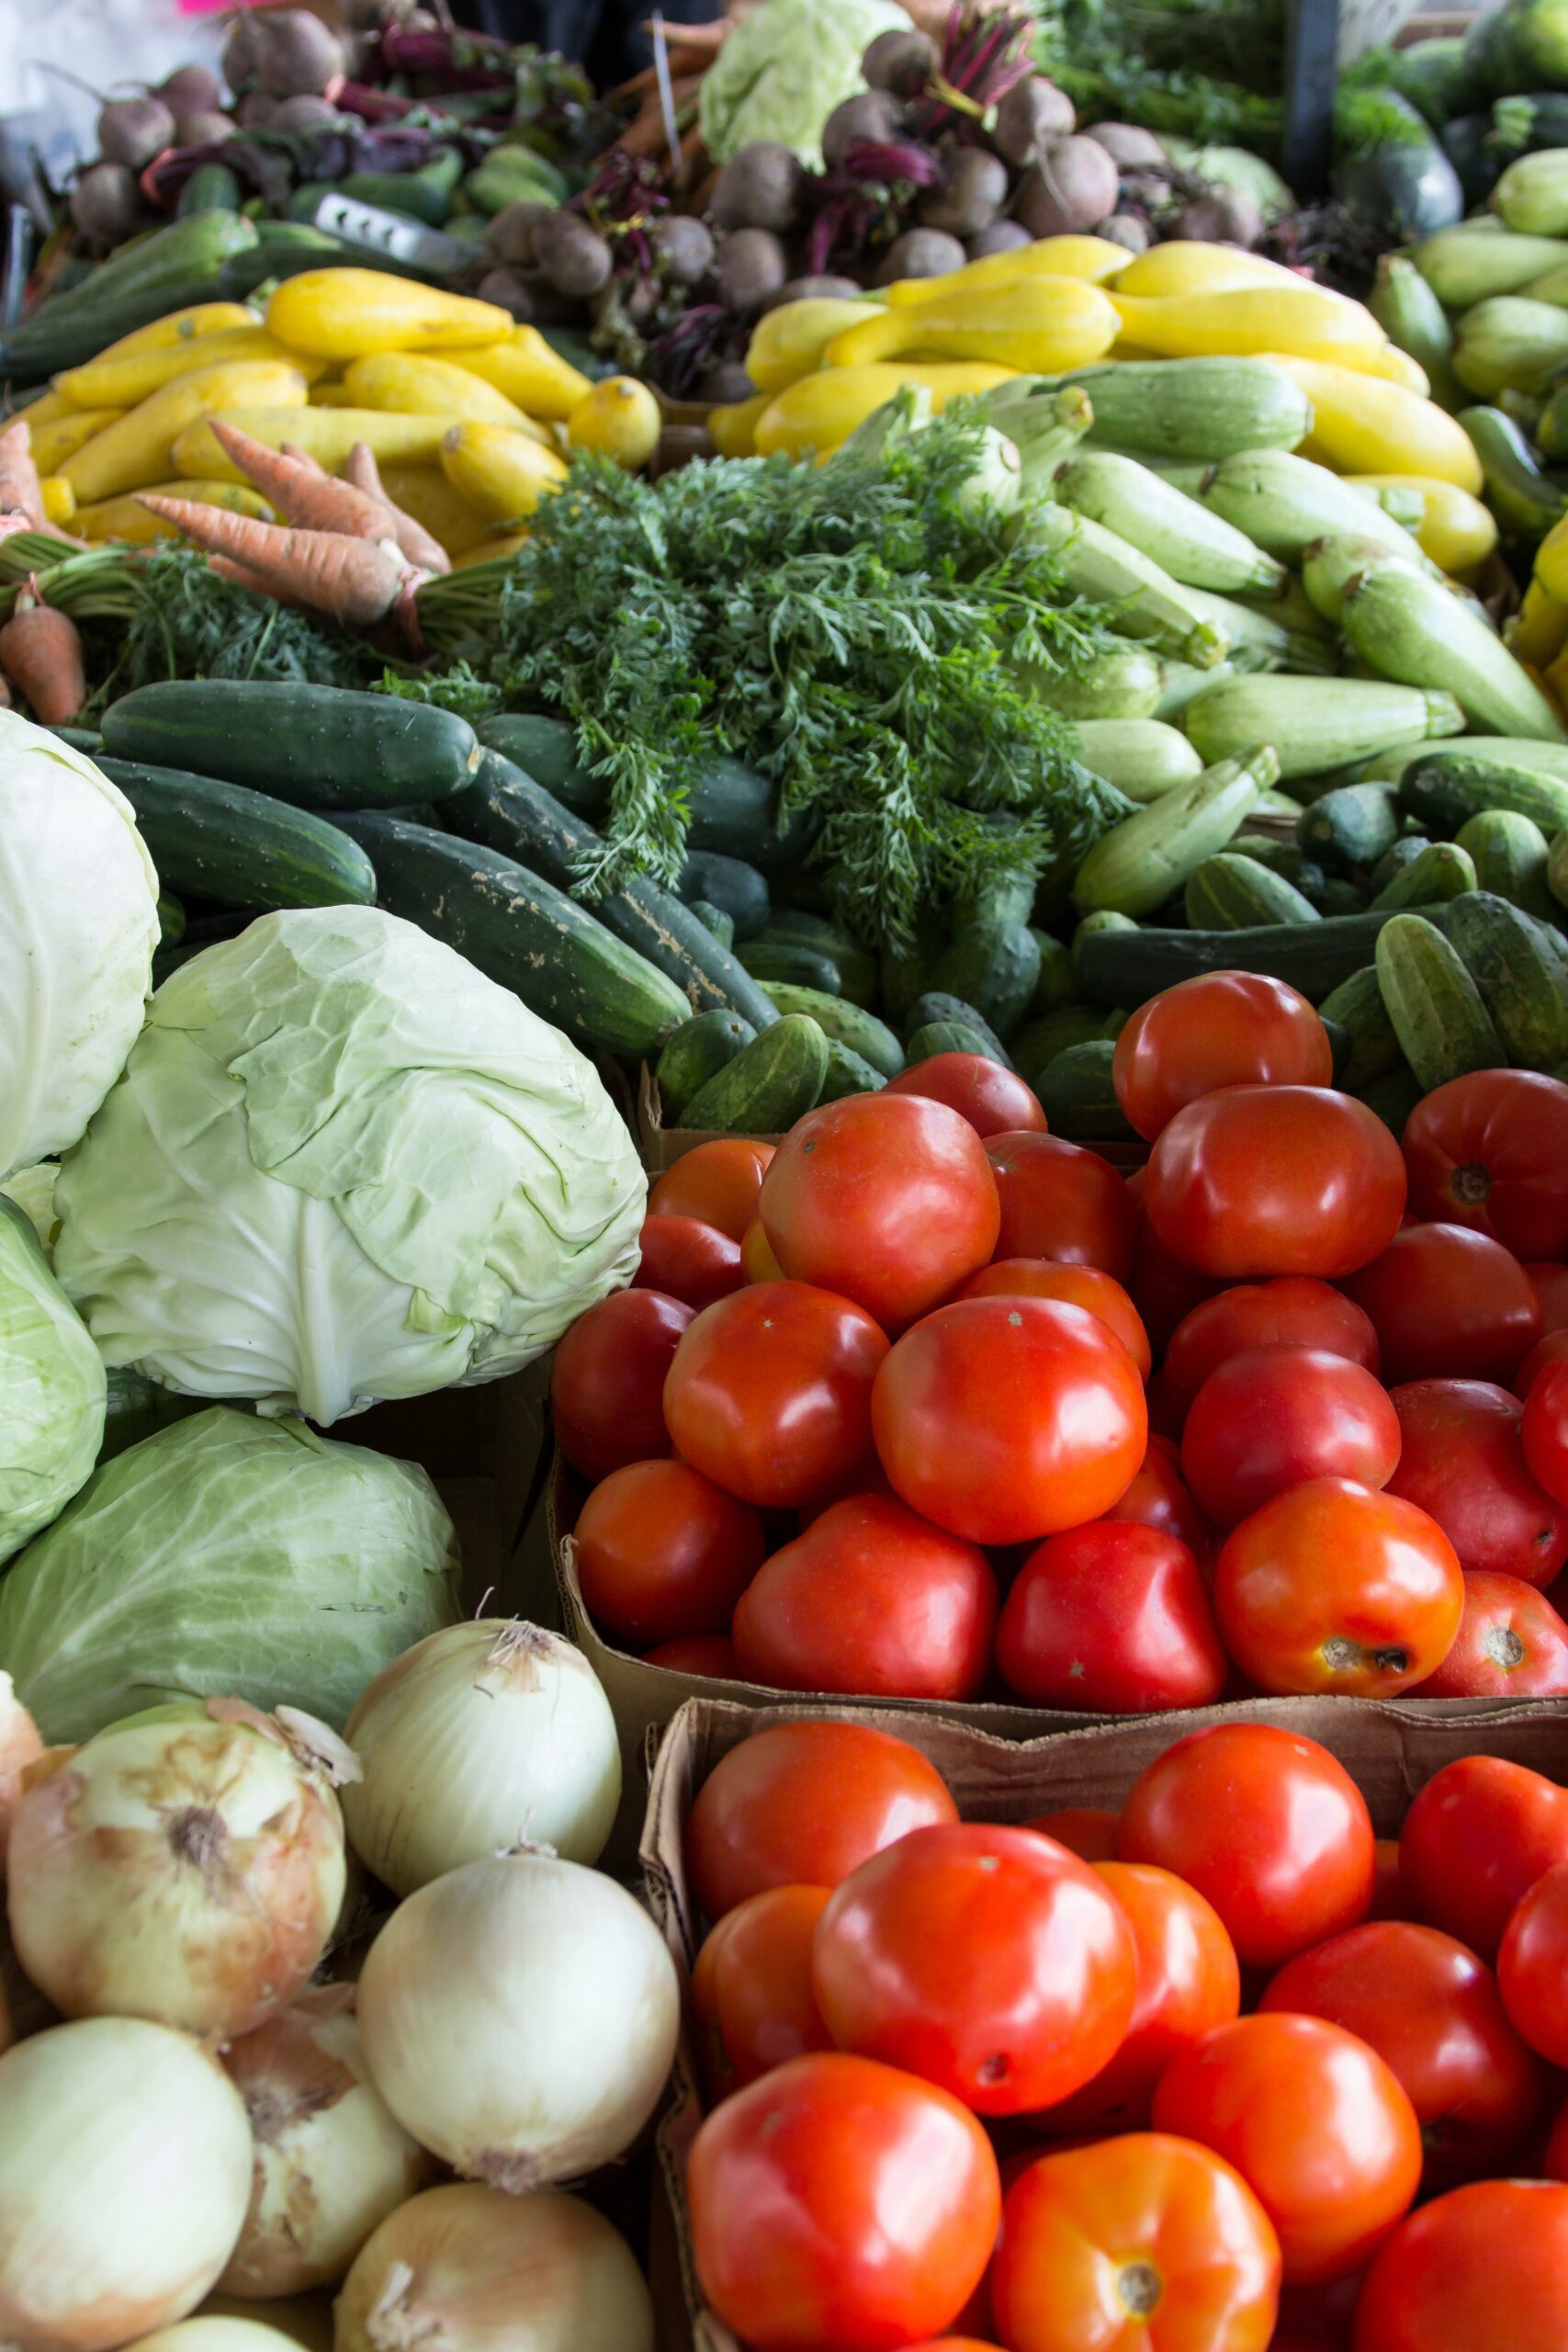 Photo of assortment of vegetables piled closely together